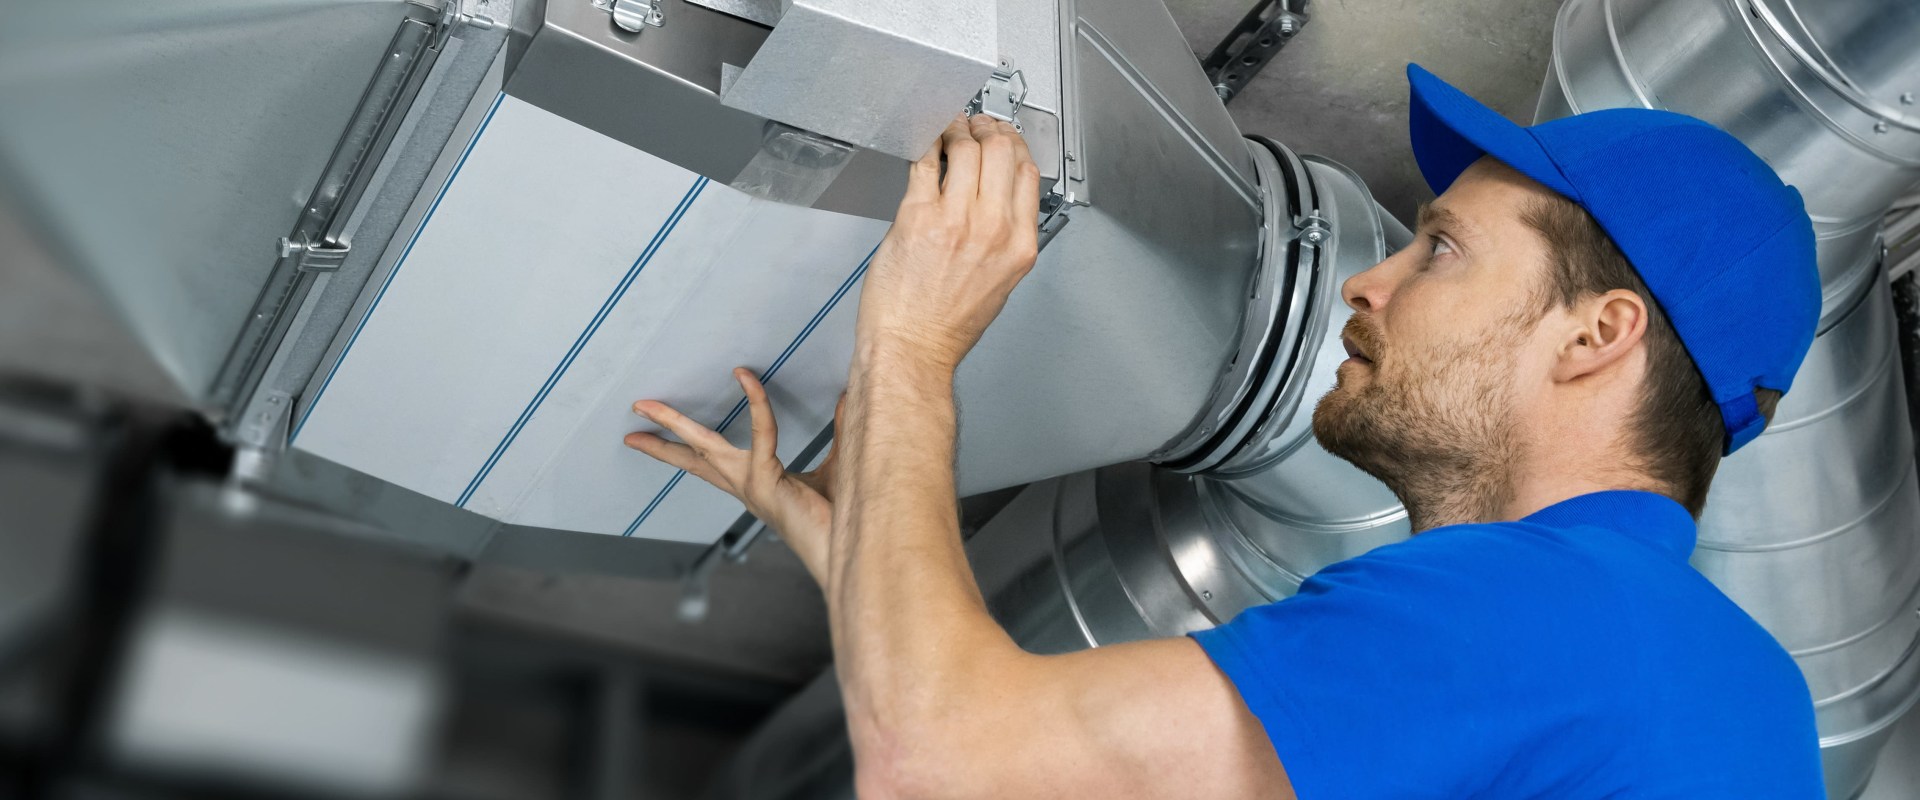 Get the Best Special Offers on HVAC System Maintenance in Coral Springs, FL